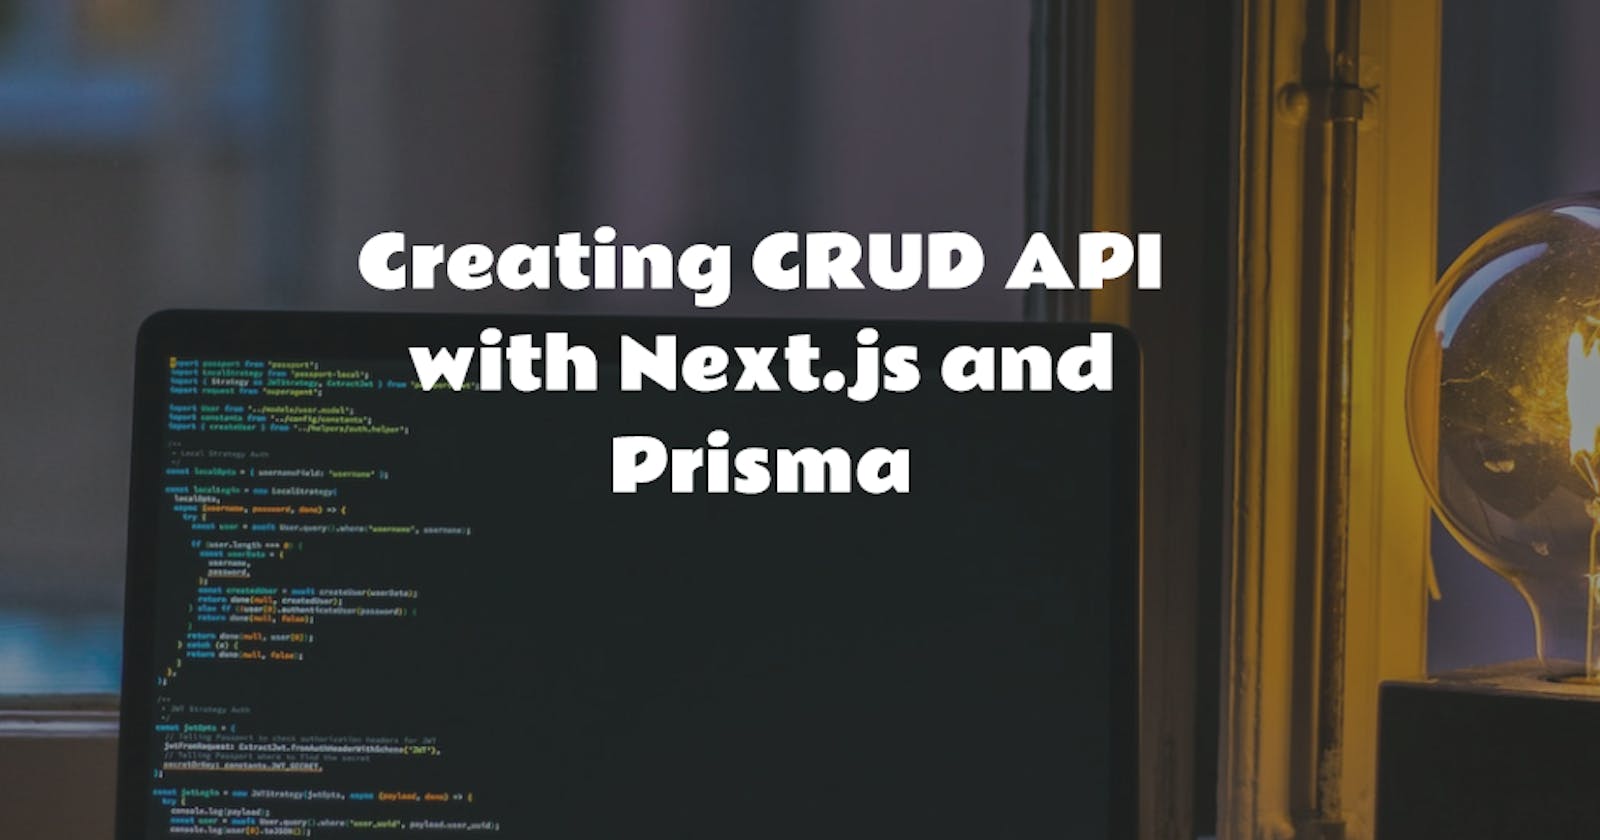 Cover Image for CRUD API with Next.js and Prisma